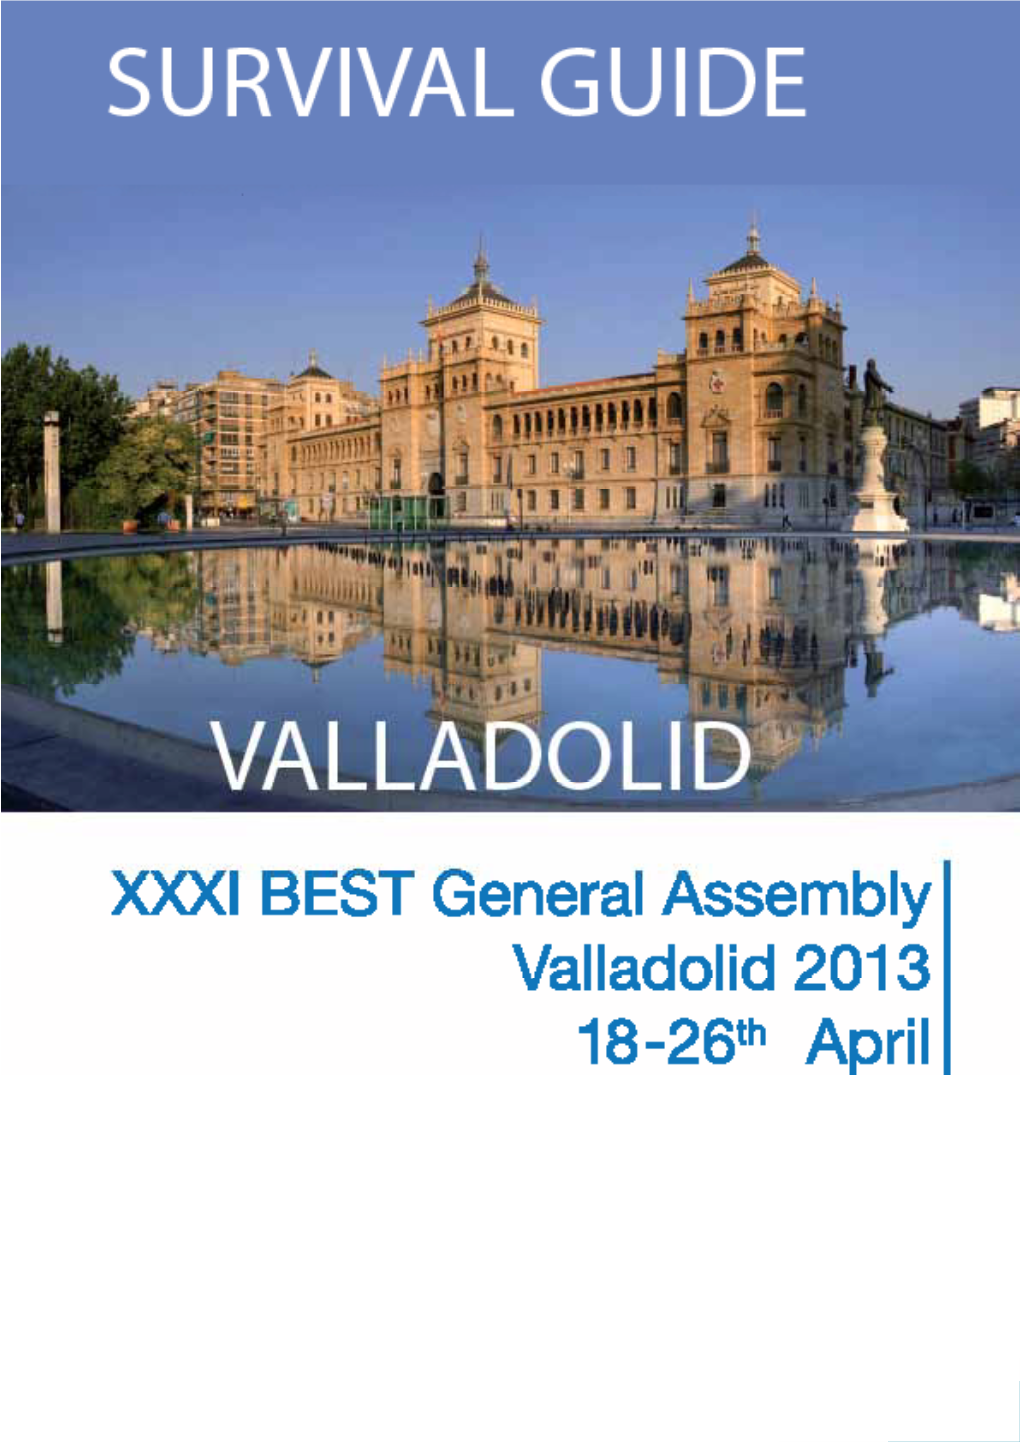 Buses from Madrid to Valladolid